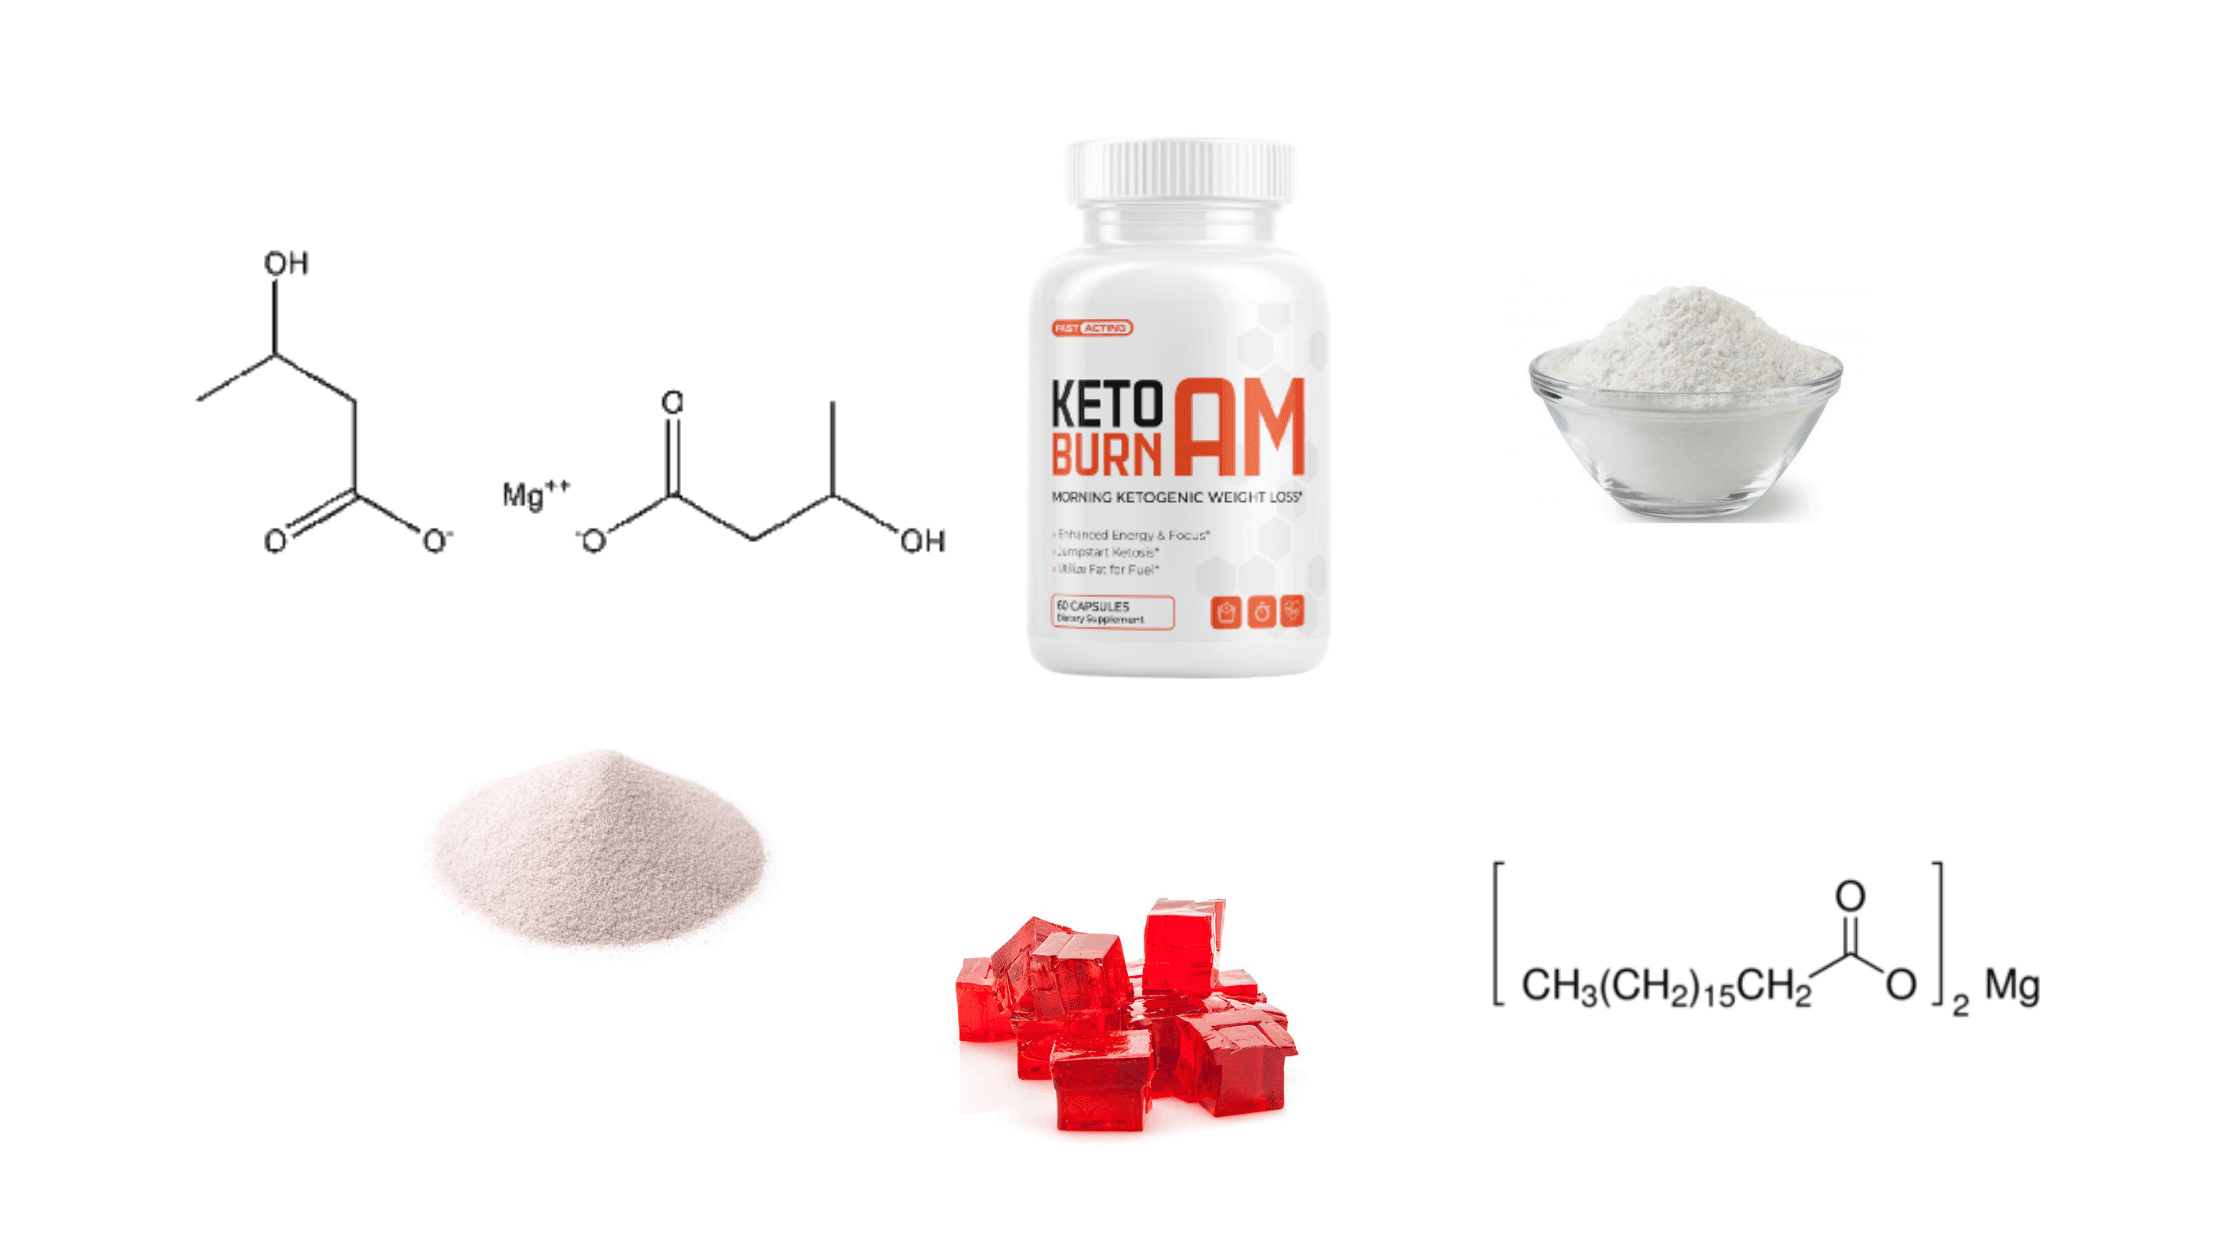 What are the Ingredients used in Keto Burn AM?